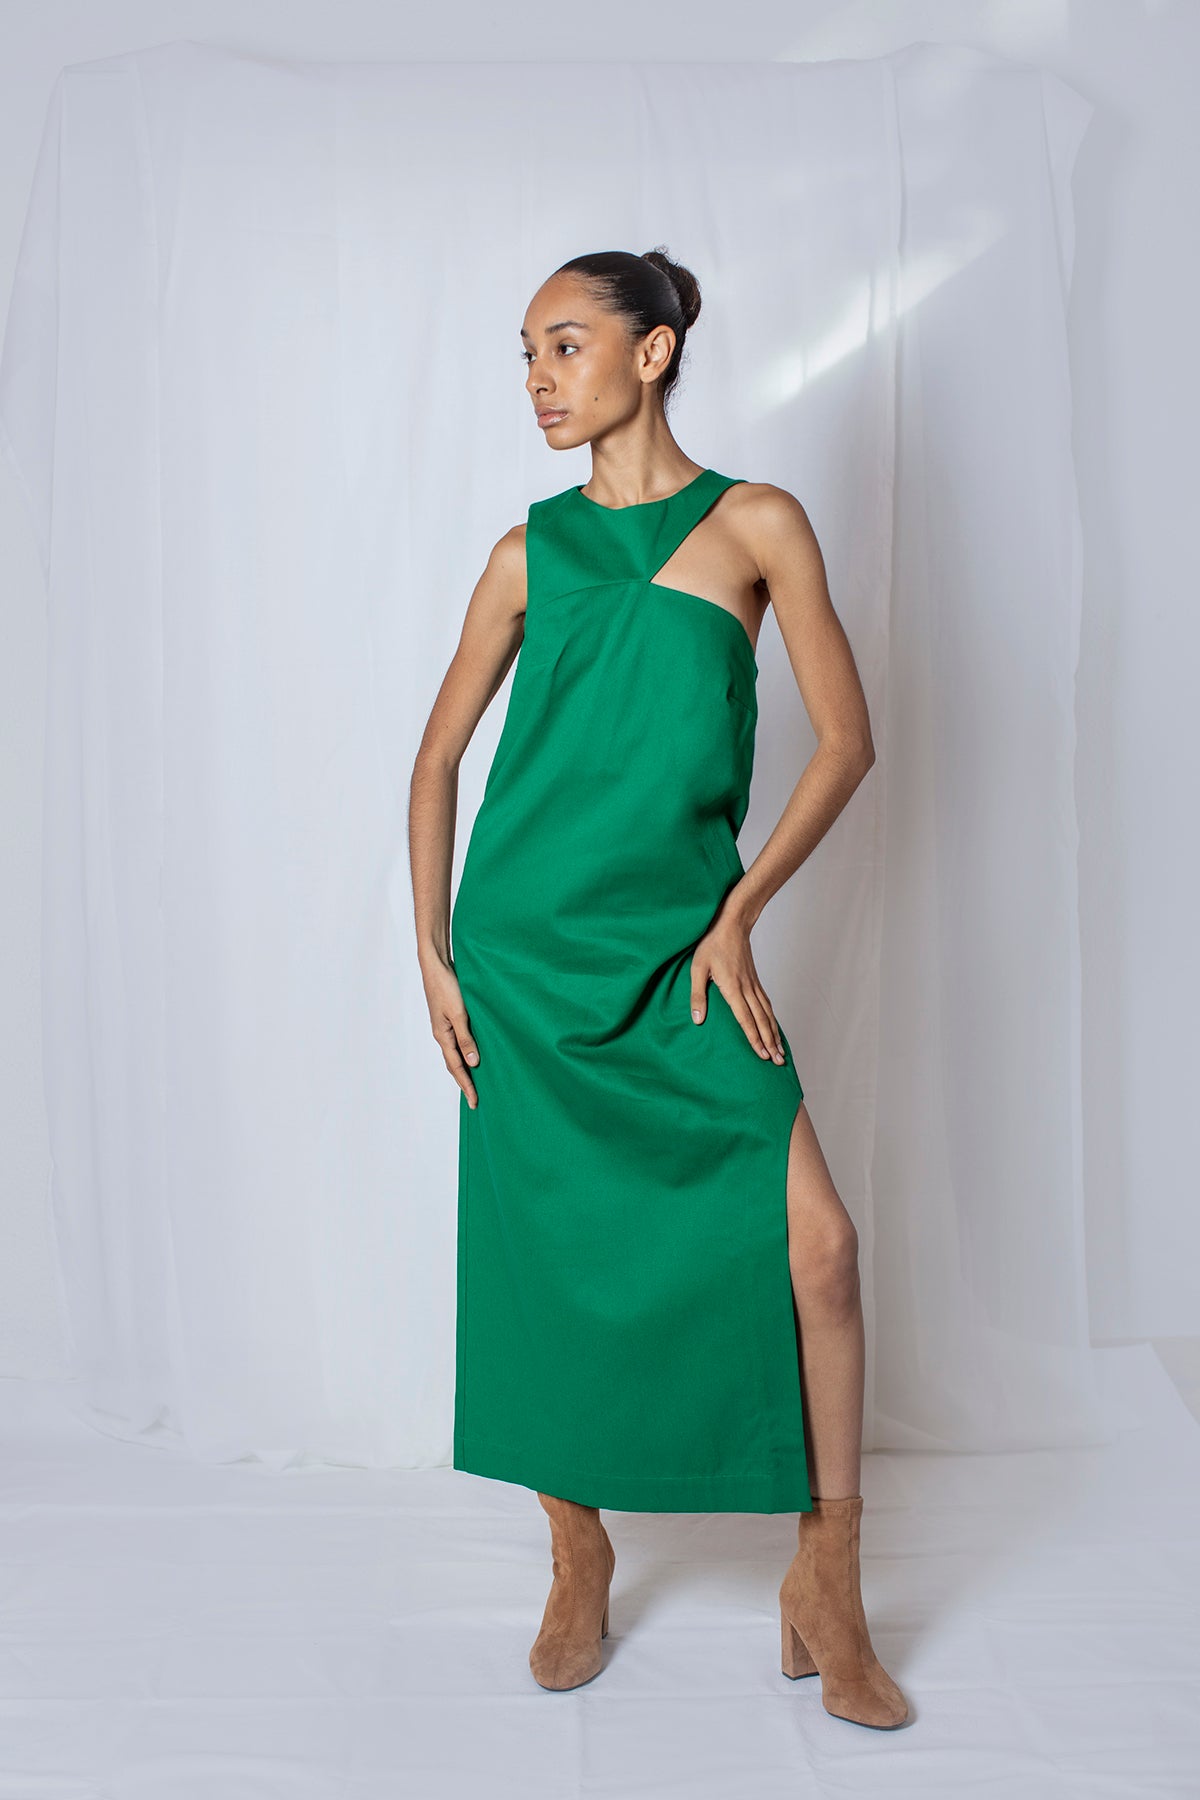 ZGEST Ava Green  Cut-Out Dress with the model